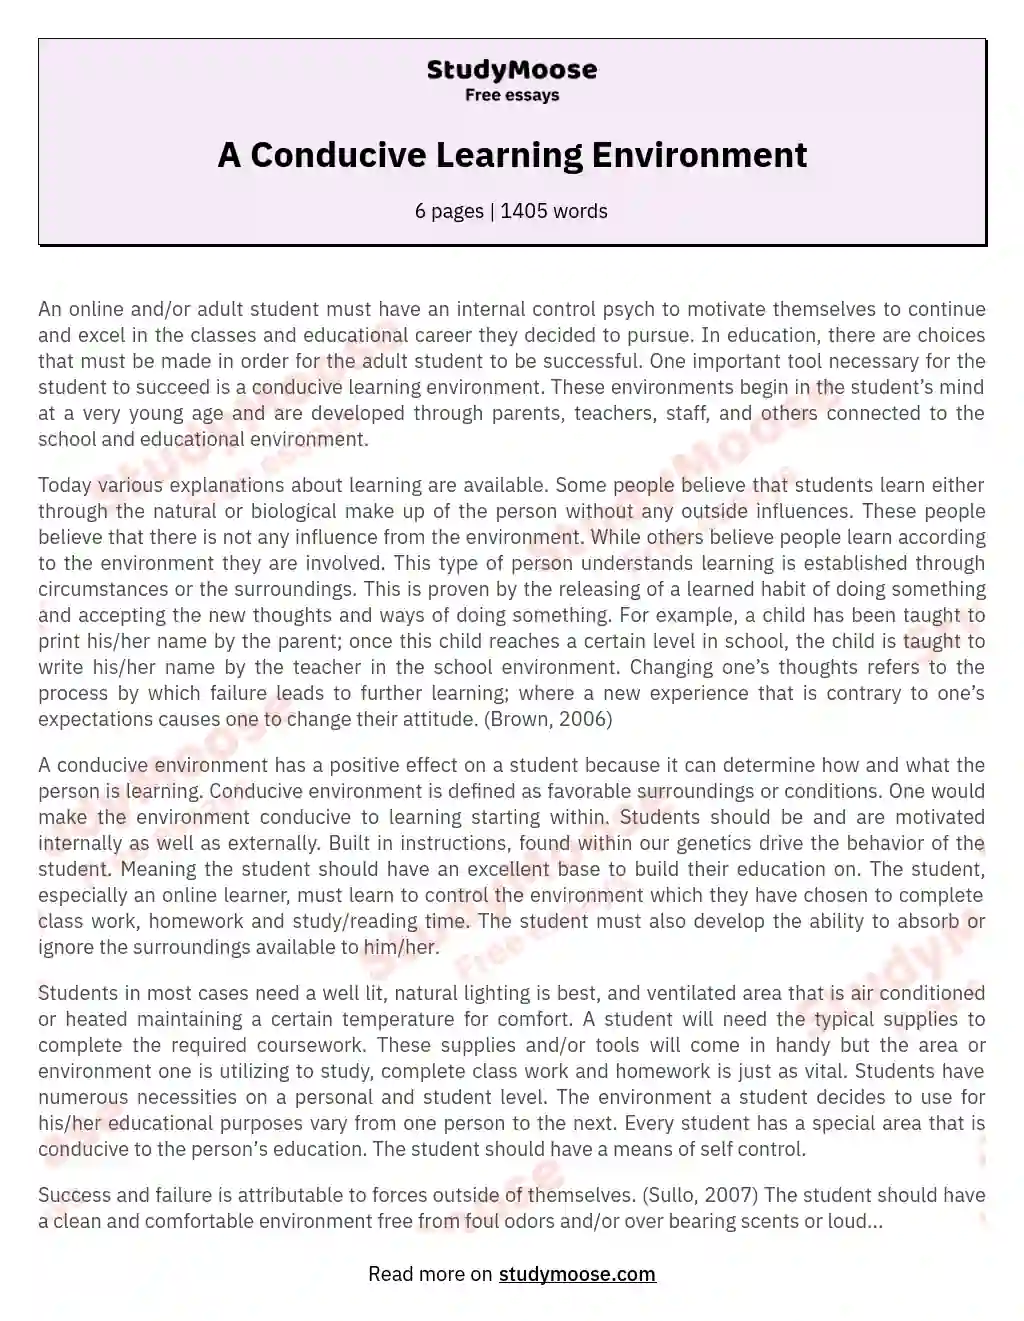 what is conducive learning environment essay